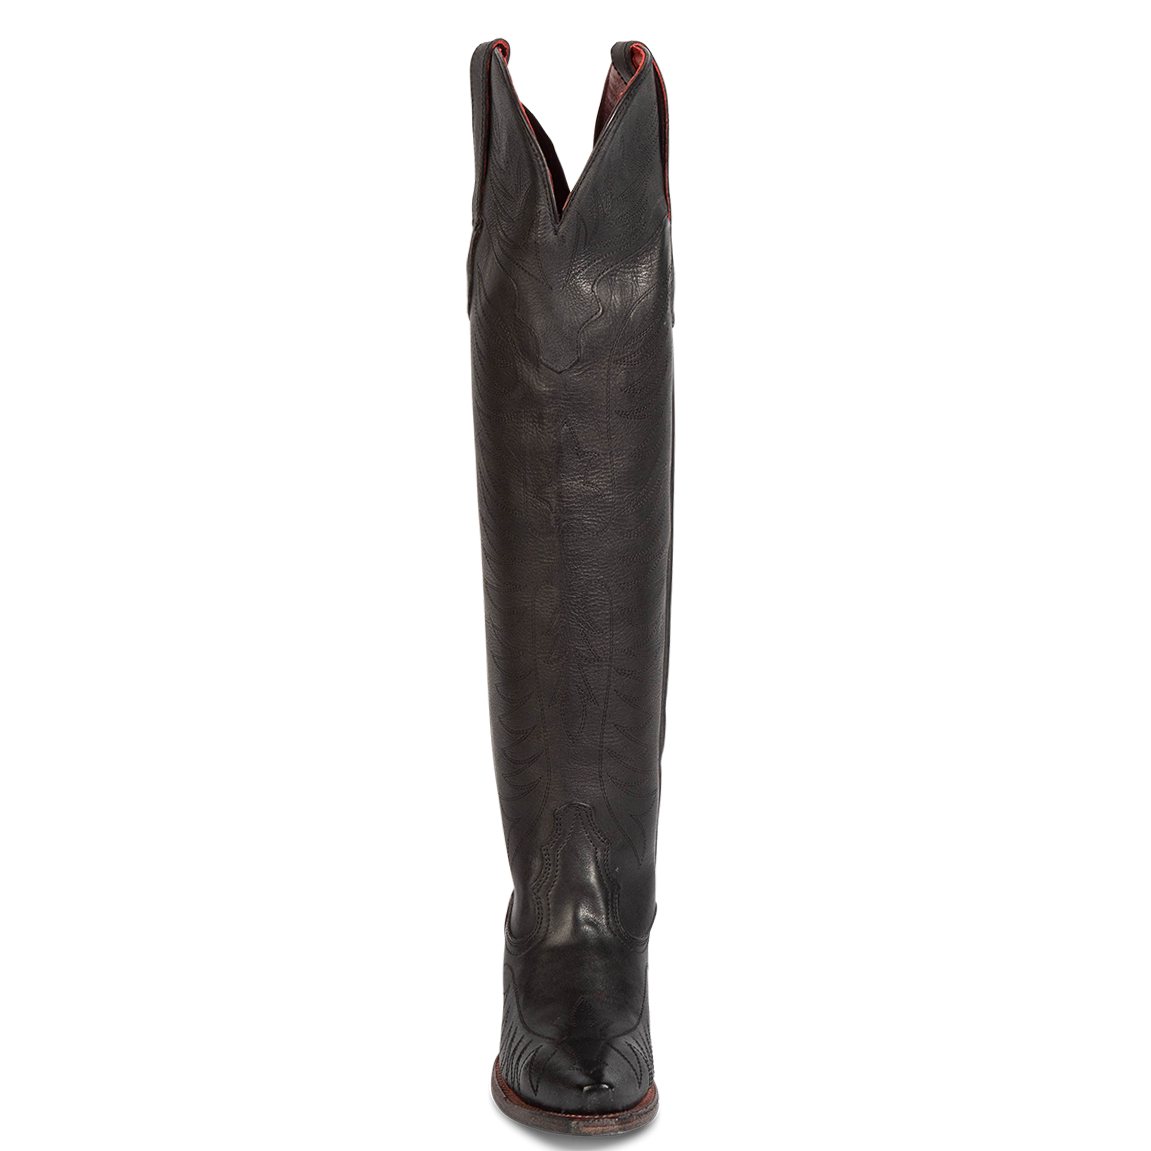 Front view showing tall shaft with stitch detailing and v-dip on FREEBIRD women's Misty black leather tall western boot